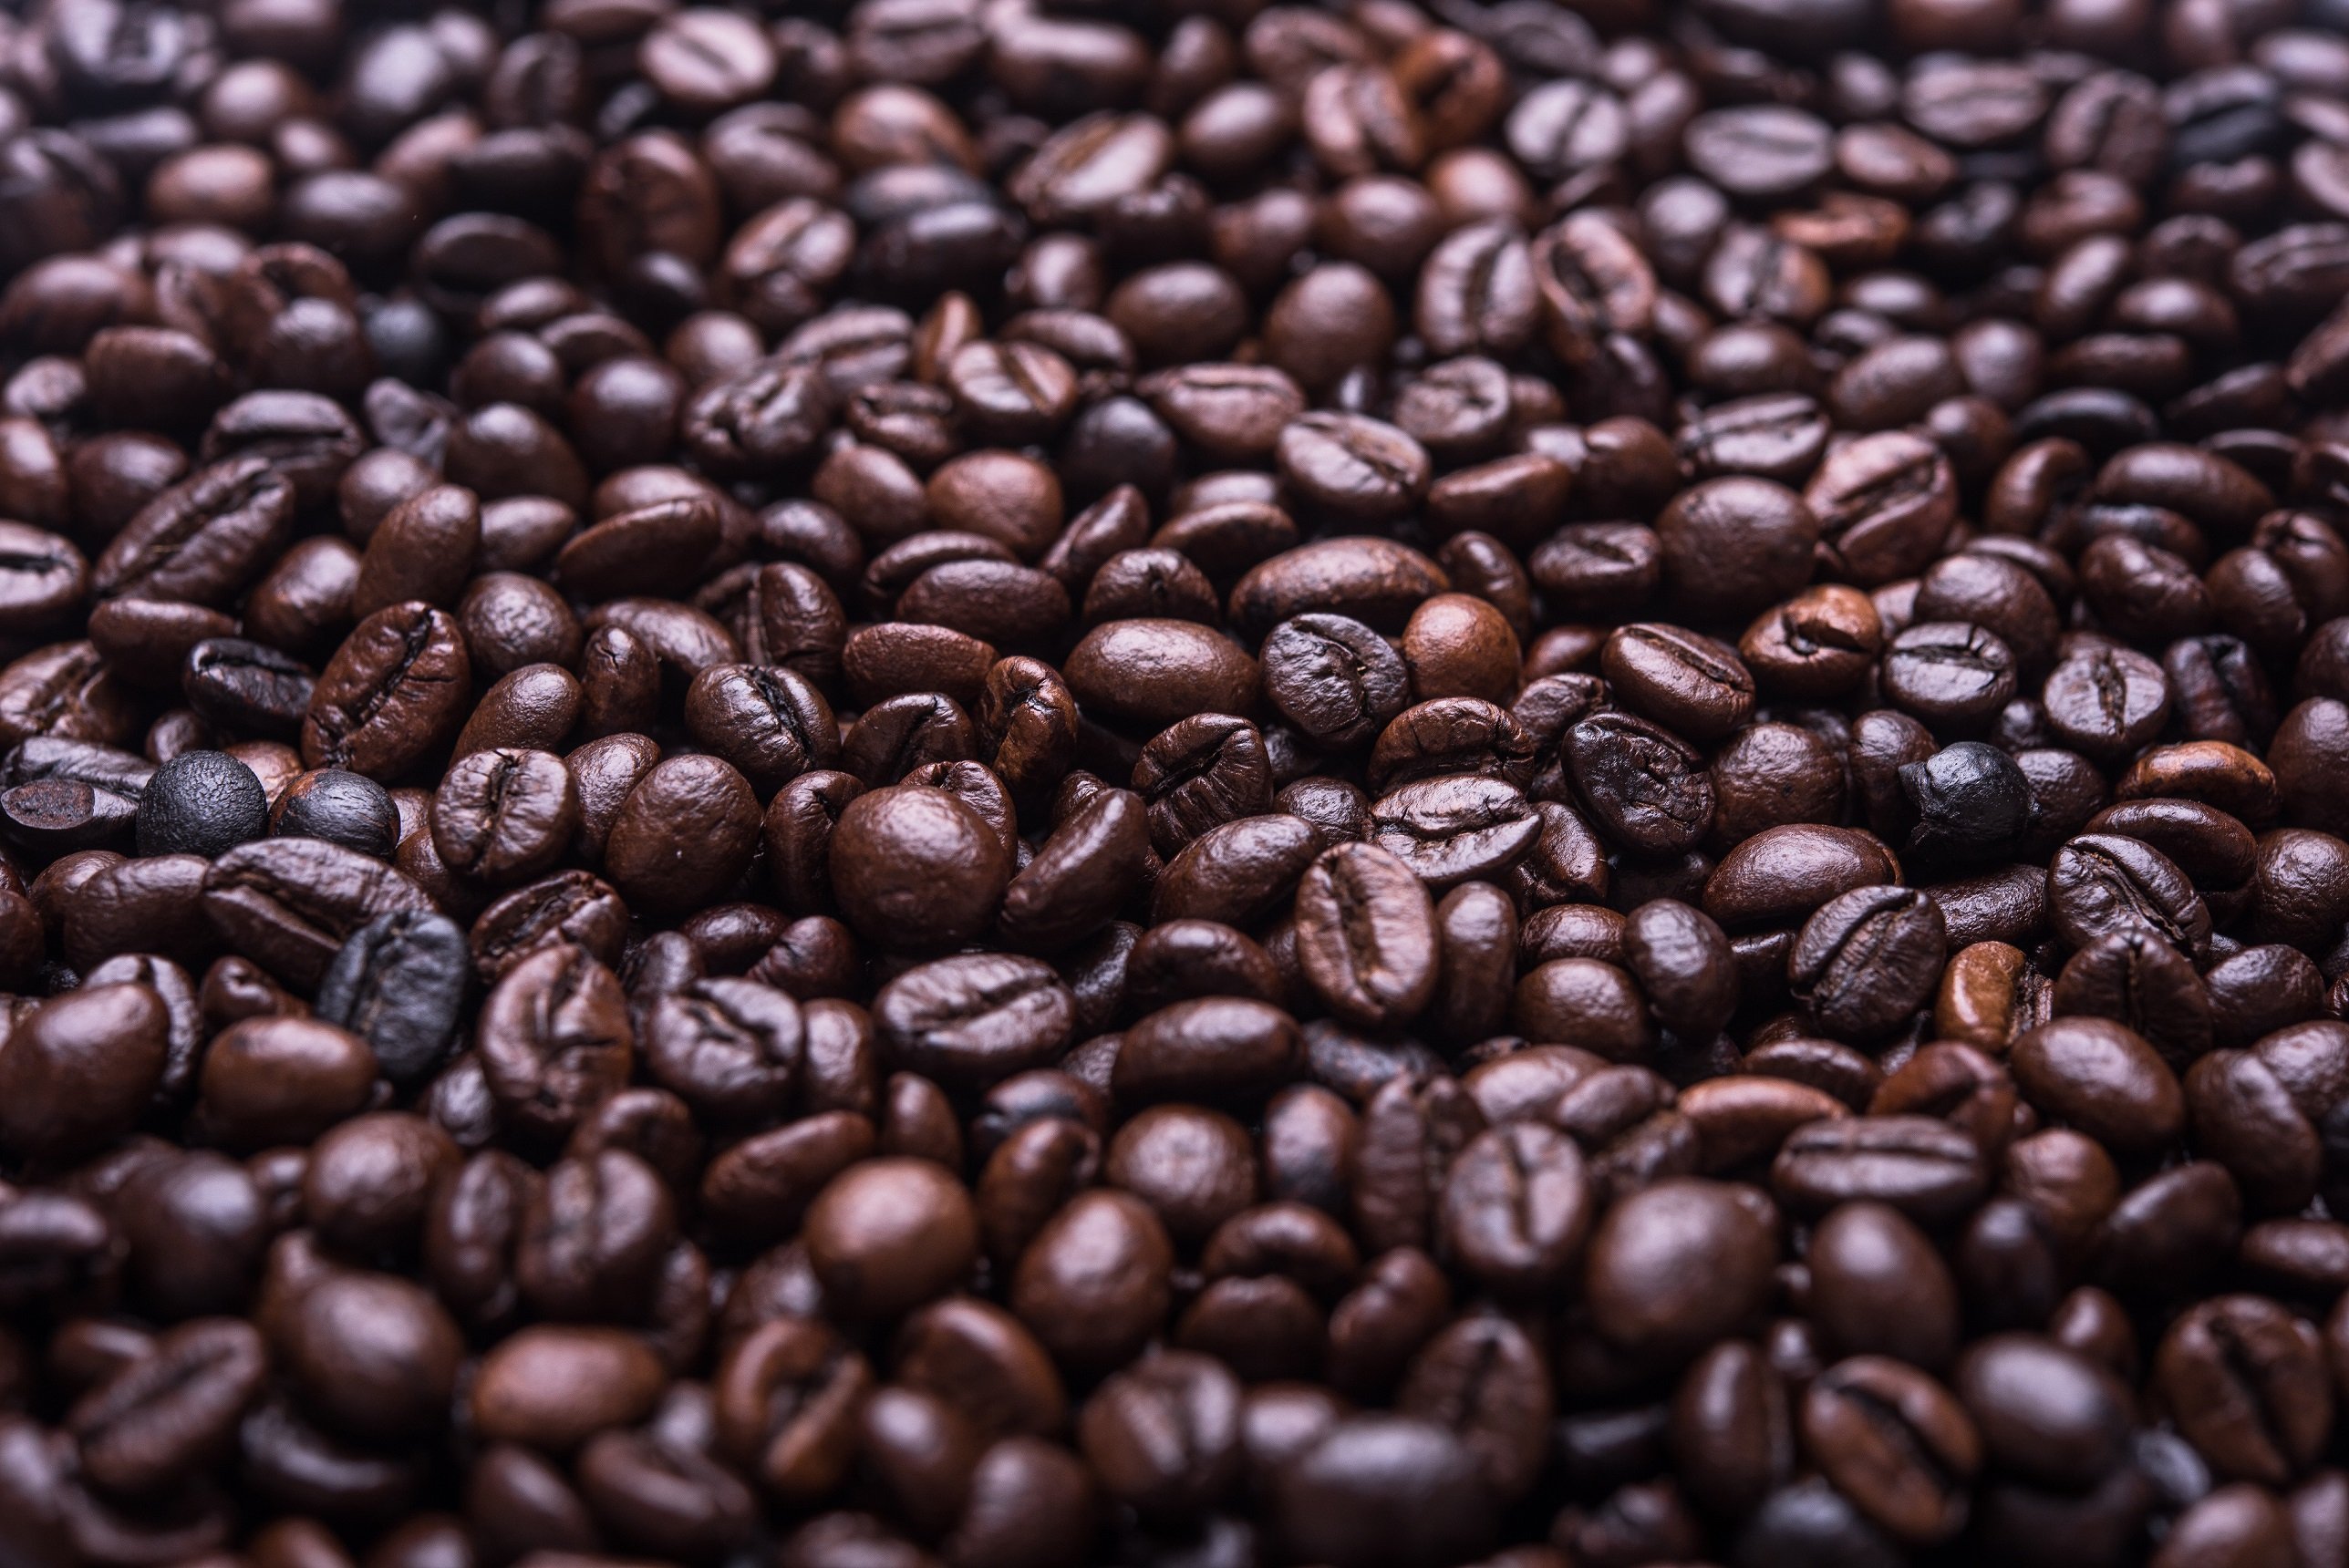 Recycling old coffee waste can help create environmentally friendly inks.